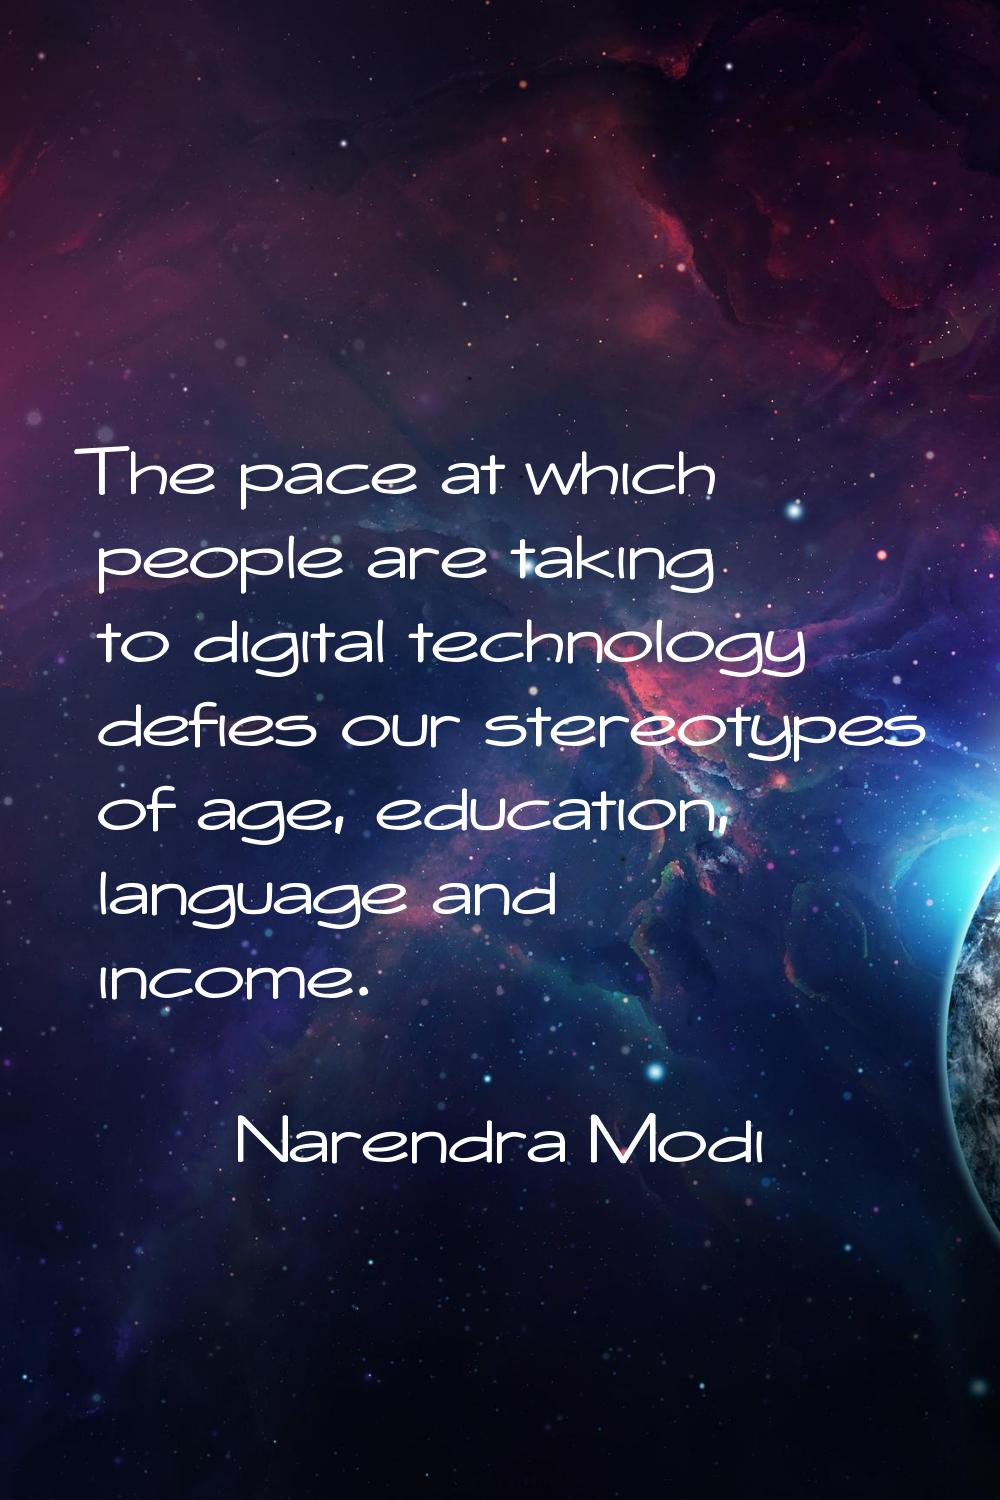 The pace at which people are taking to digital technology defies our stereotypes of age, education,